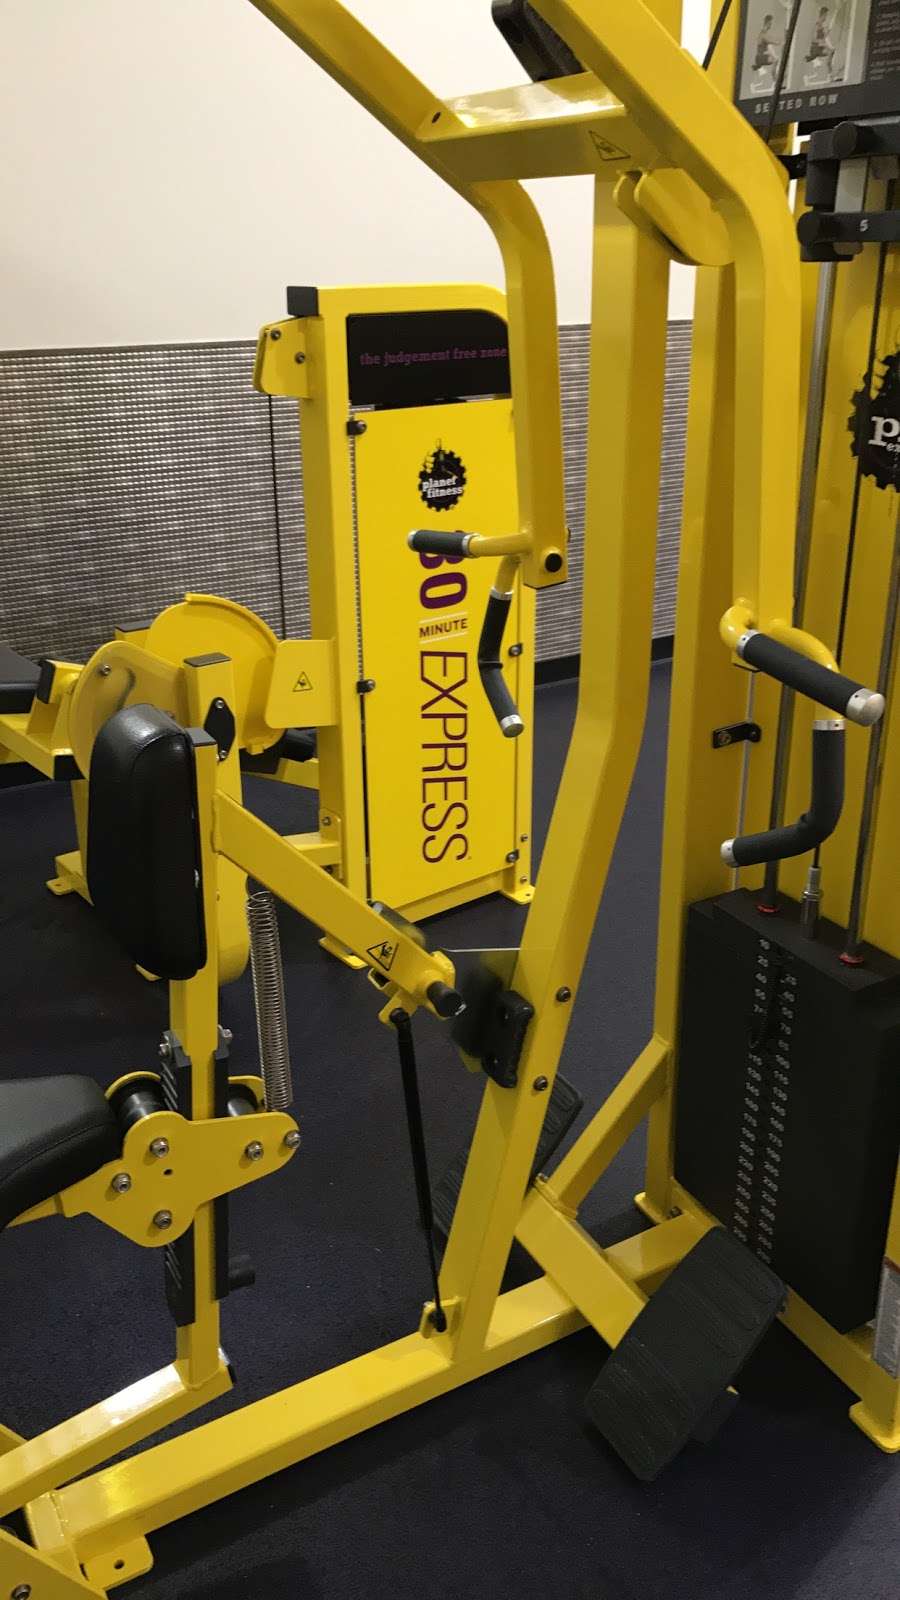 Planet Fitness | 180 Concord Commons Pl SW, Concord, NC 28027, USA | Phone: (704) 786-4050